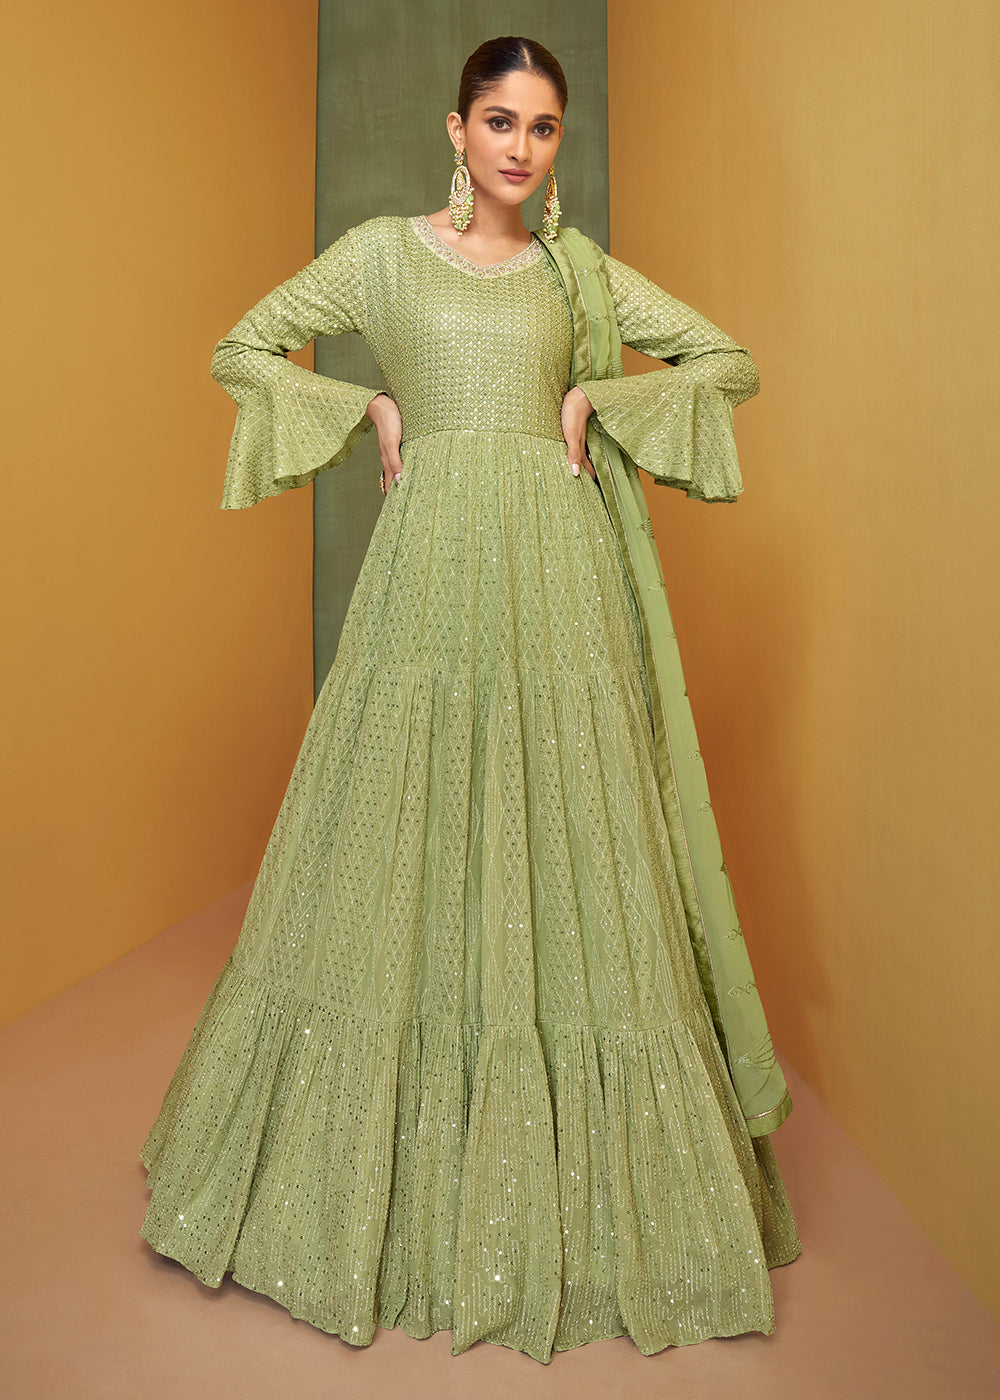 Buy Now Pretty Pastel Green Wedding Embroidered Bridal Anarkali Gown Online in USA, UK, Australia, New Zealand, Canada & Worldwide at Empress Clothing. 